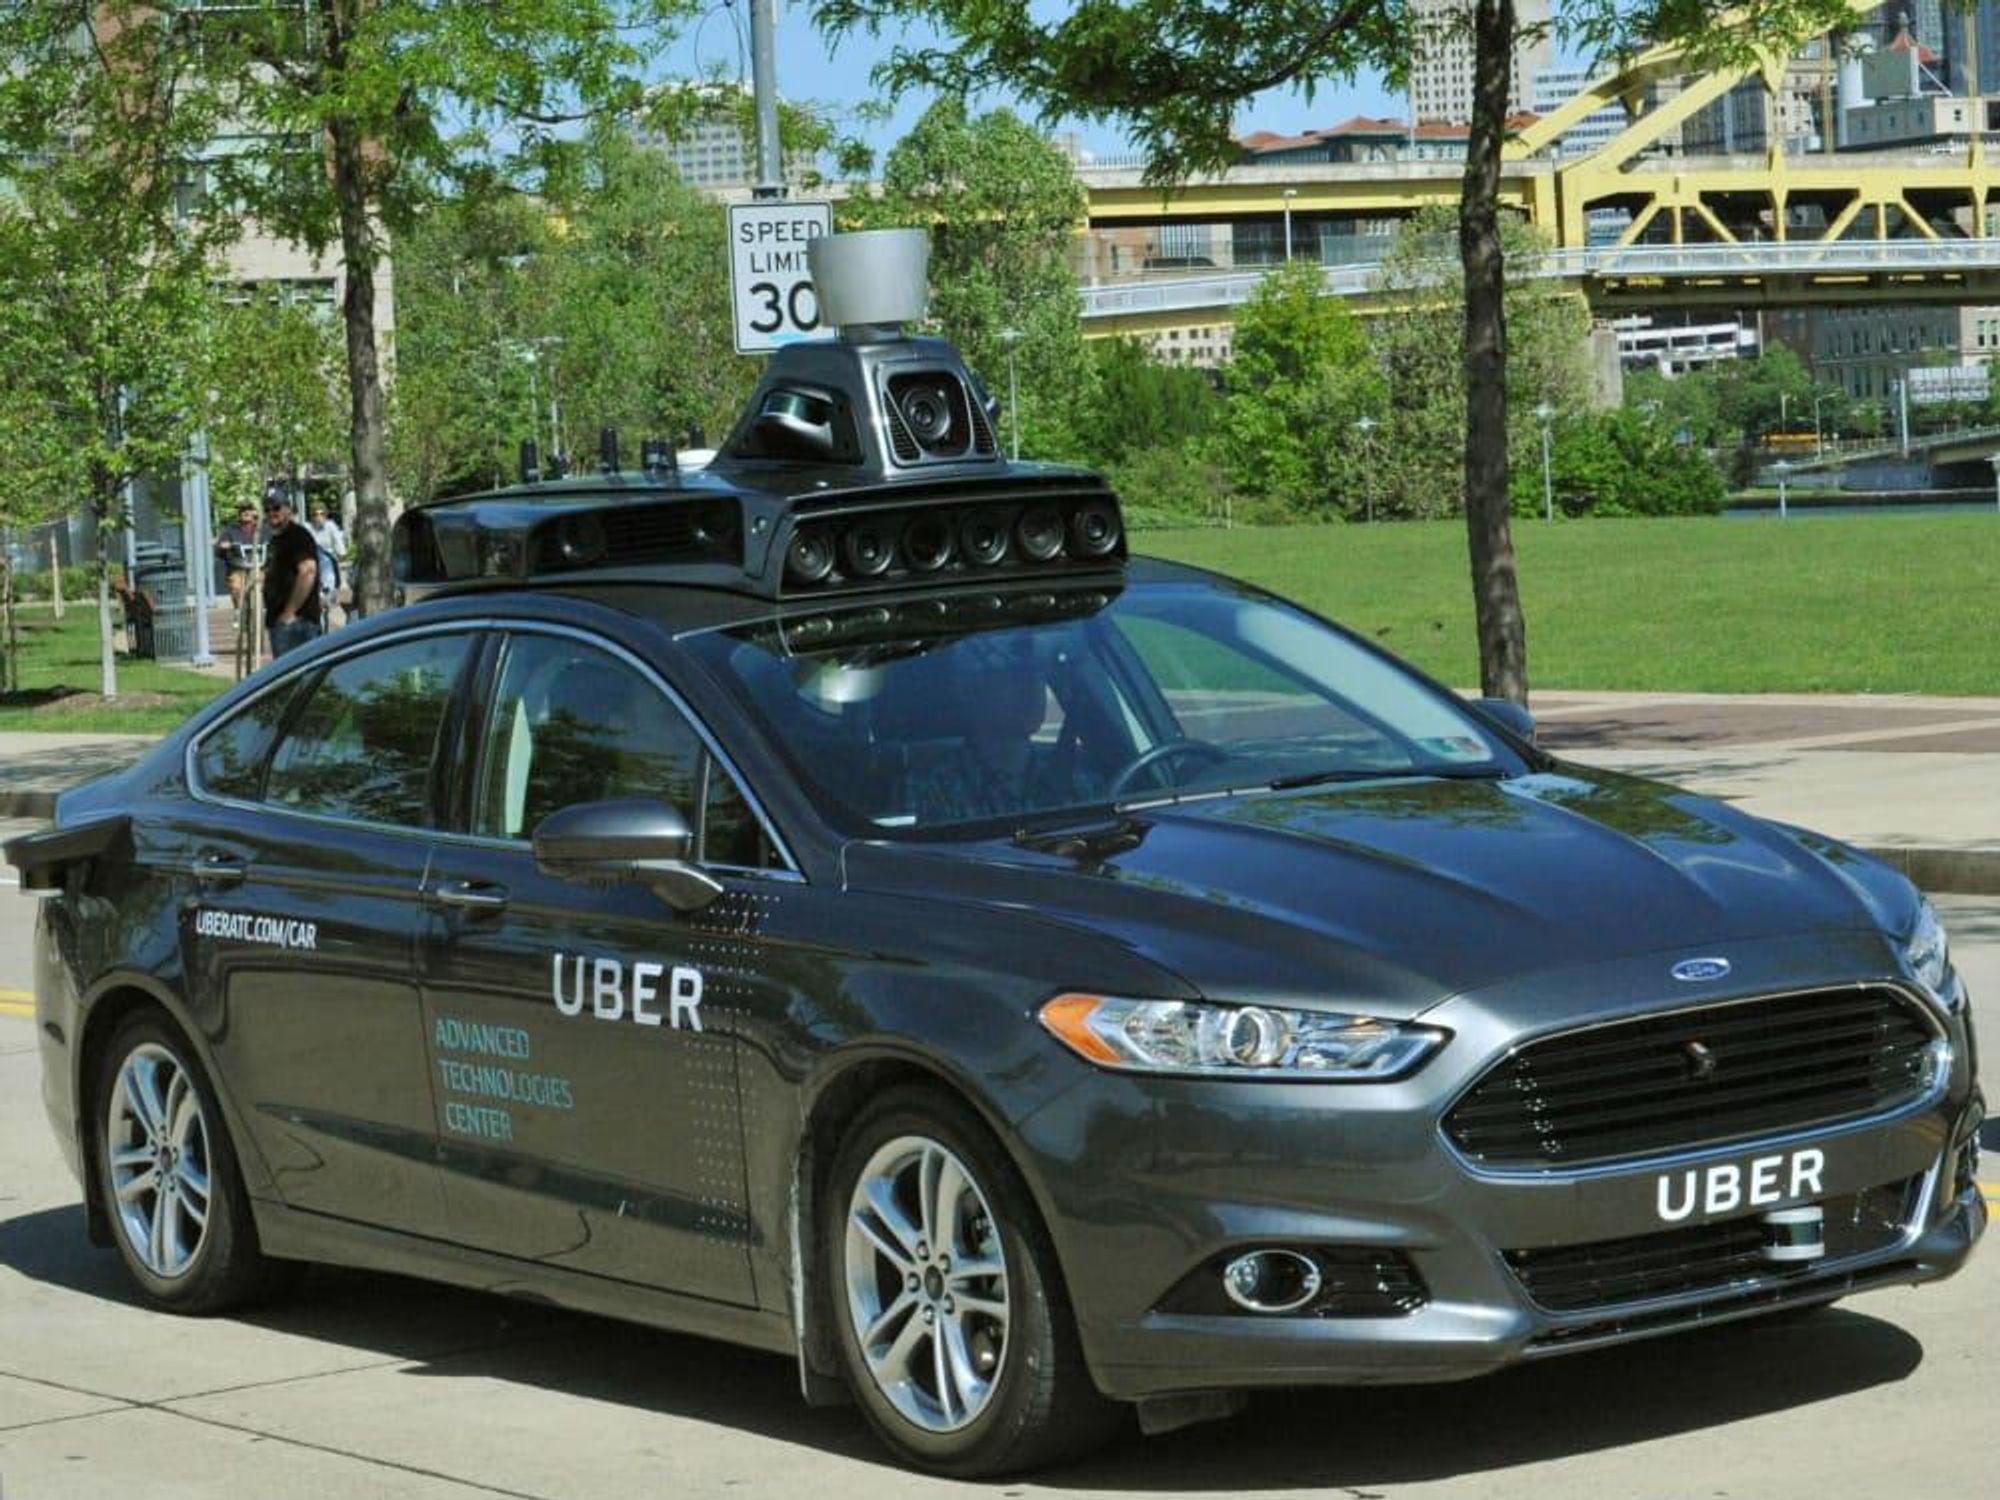 Uber Advanced Technologies Center mapping self-driving car vehicle